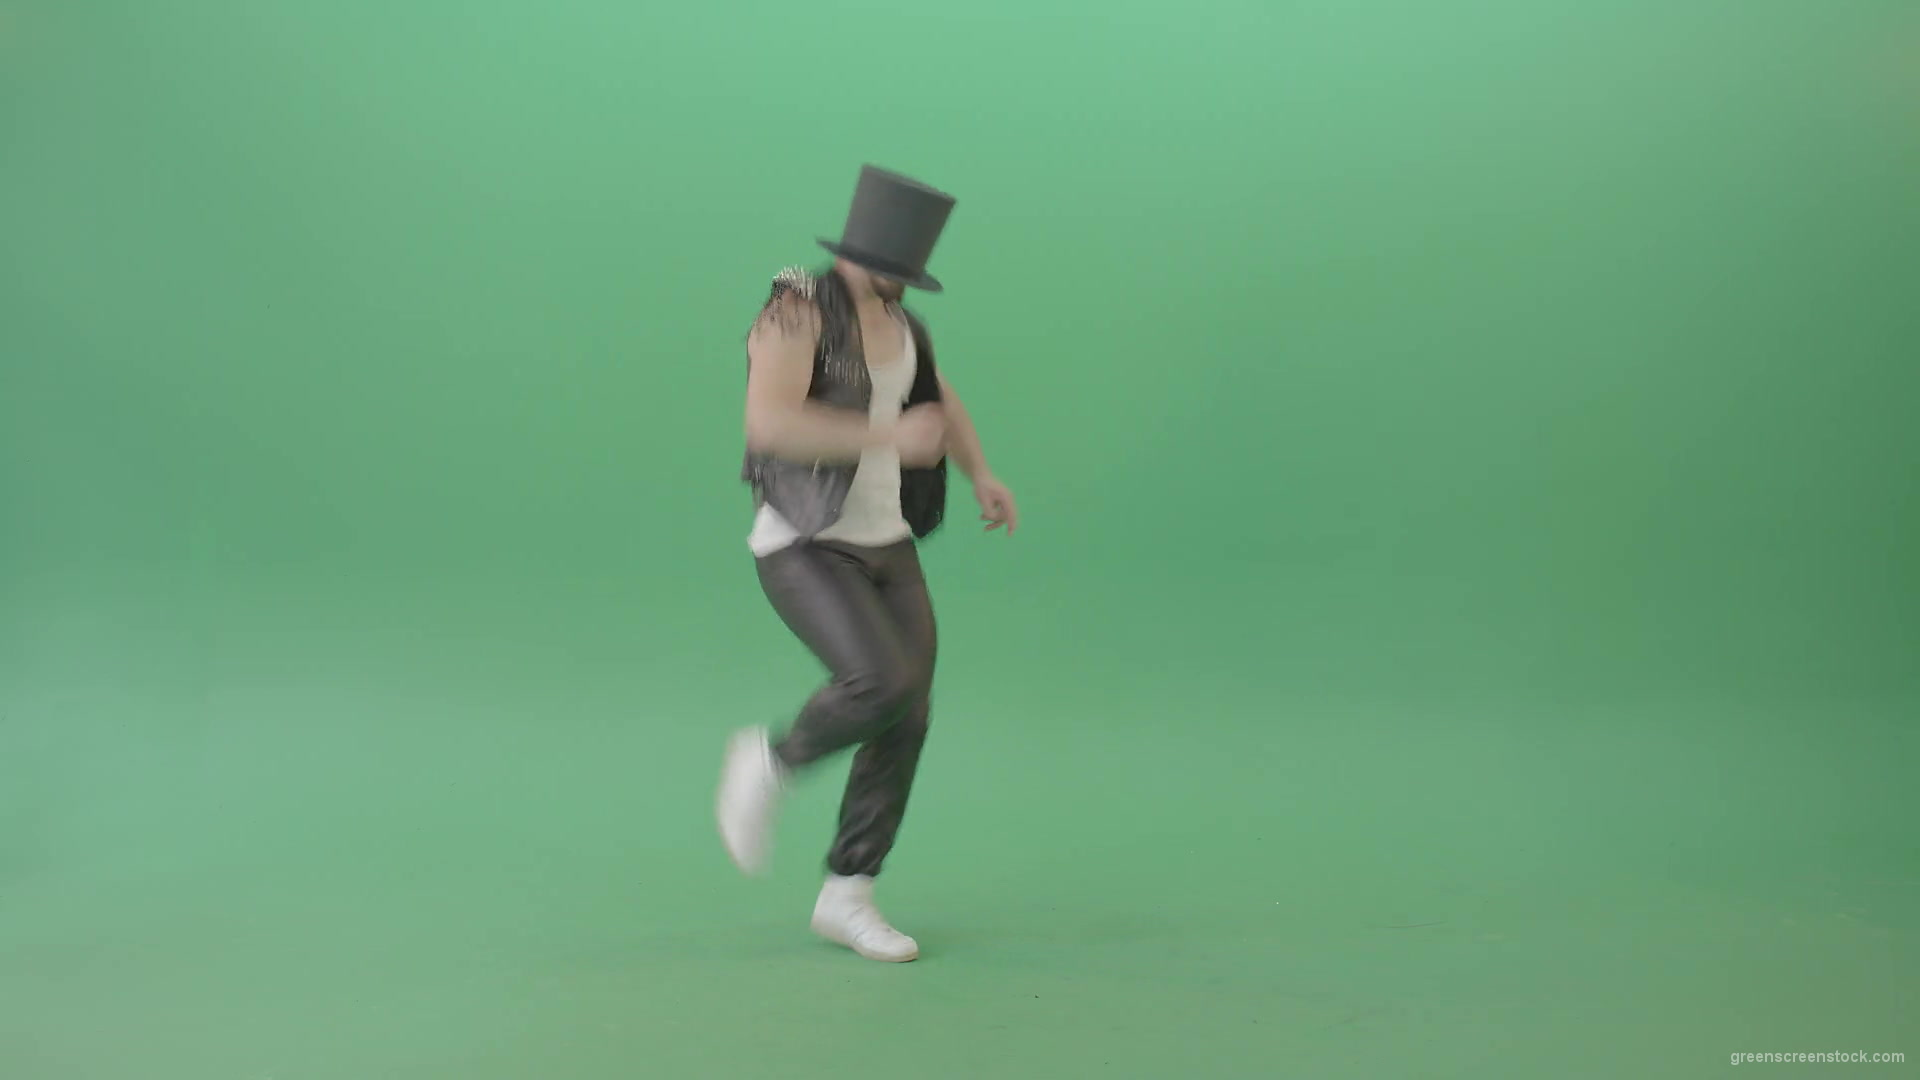 Funny-Man-in-Cylinder-Hat-and-black-fetish-costume-dancing-and-jumping-over-Green-Screen-4K-Video-Footage-1920_008 Green Screen Stock